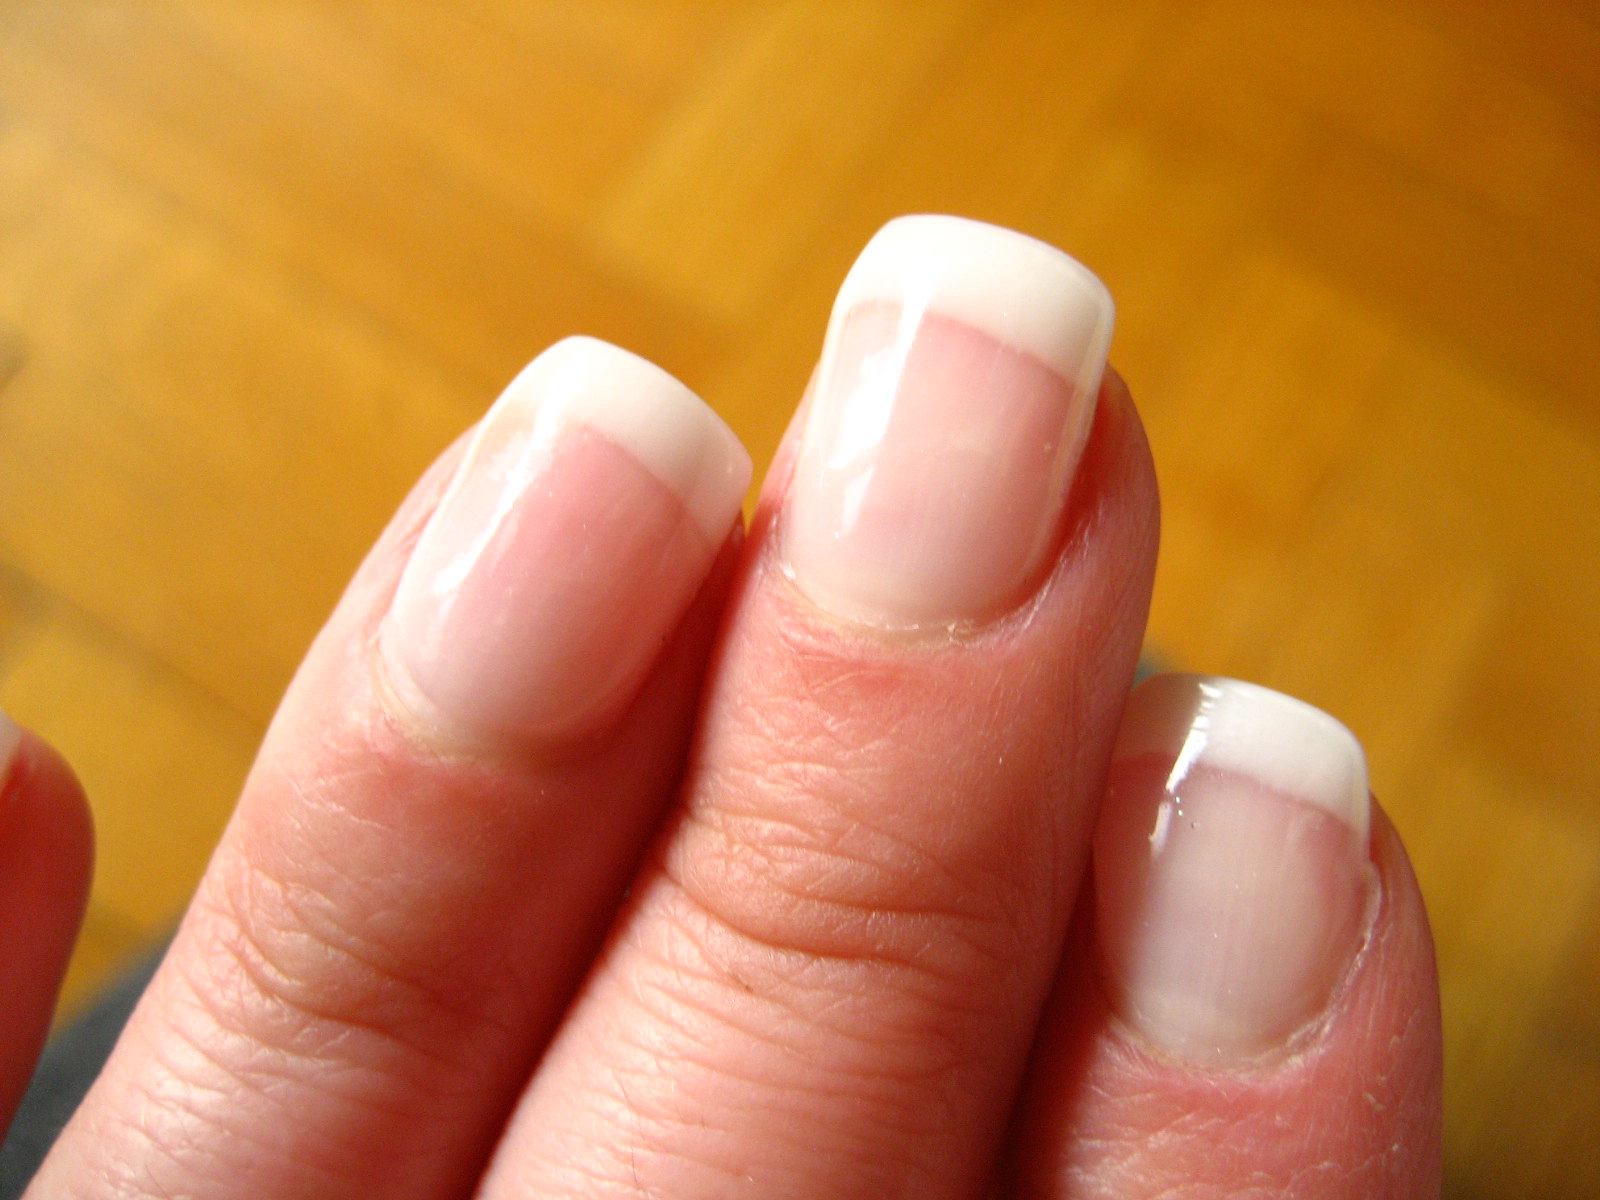 French manicure by sunshinecity on Flickr